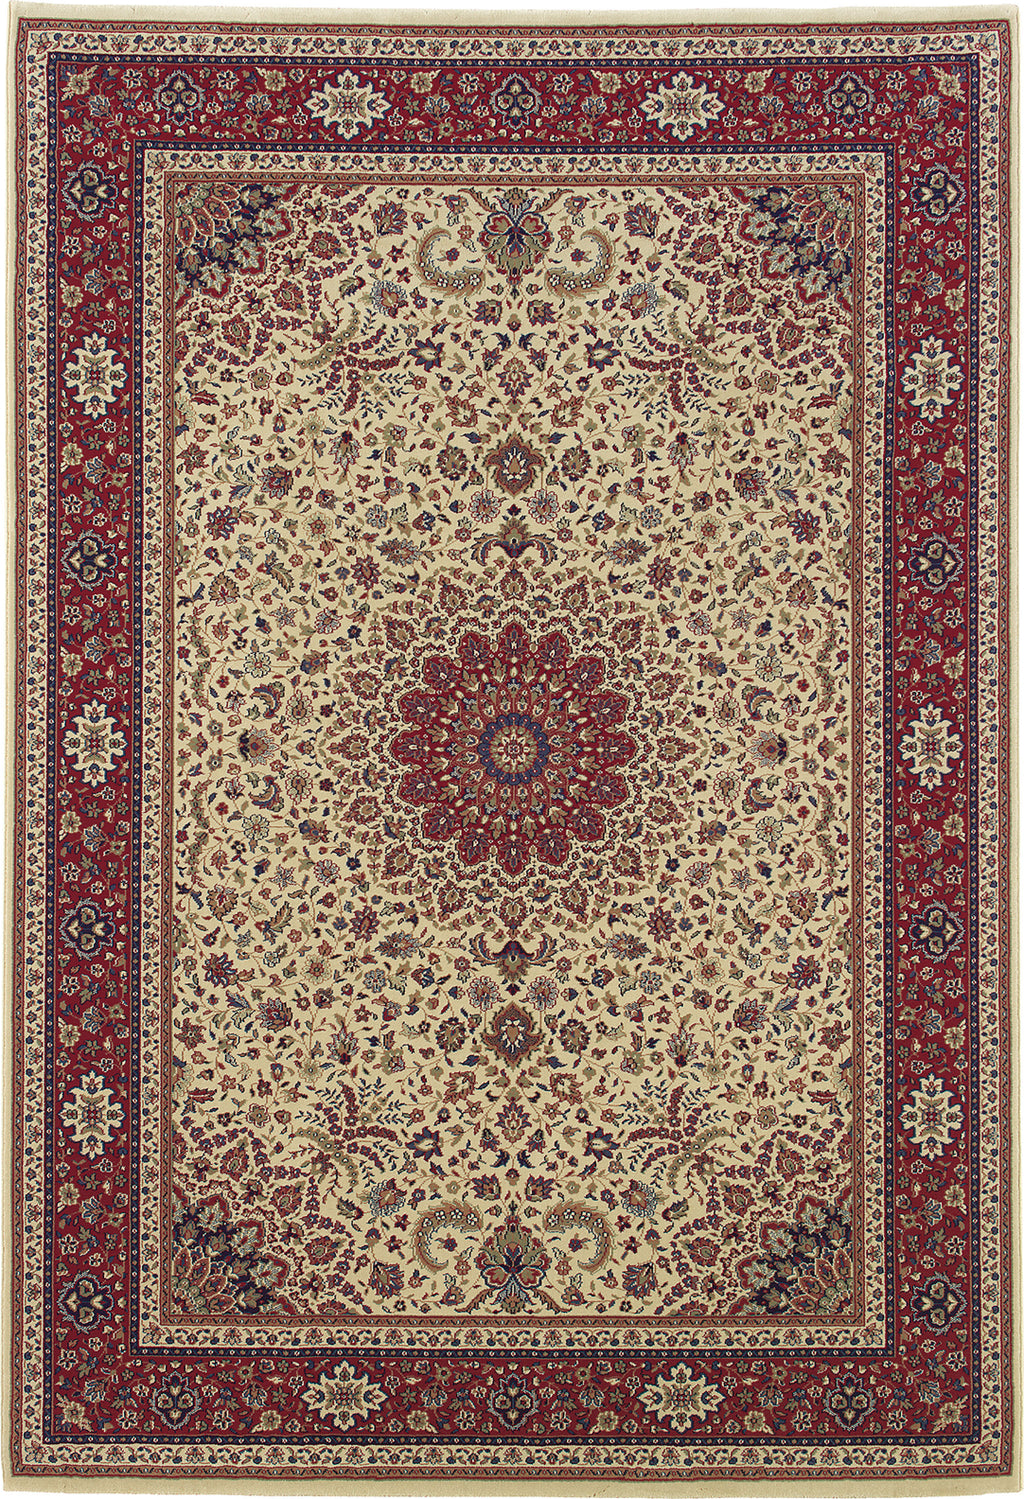 Oriental Weavers Ariana 095J3 Ivory/Red Area Rug main image Featured